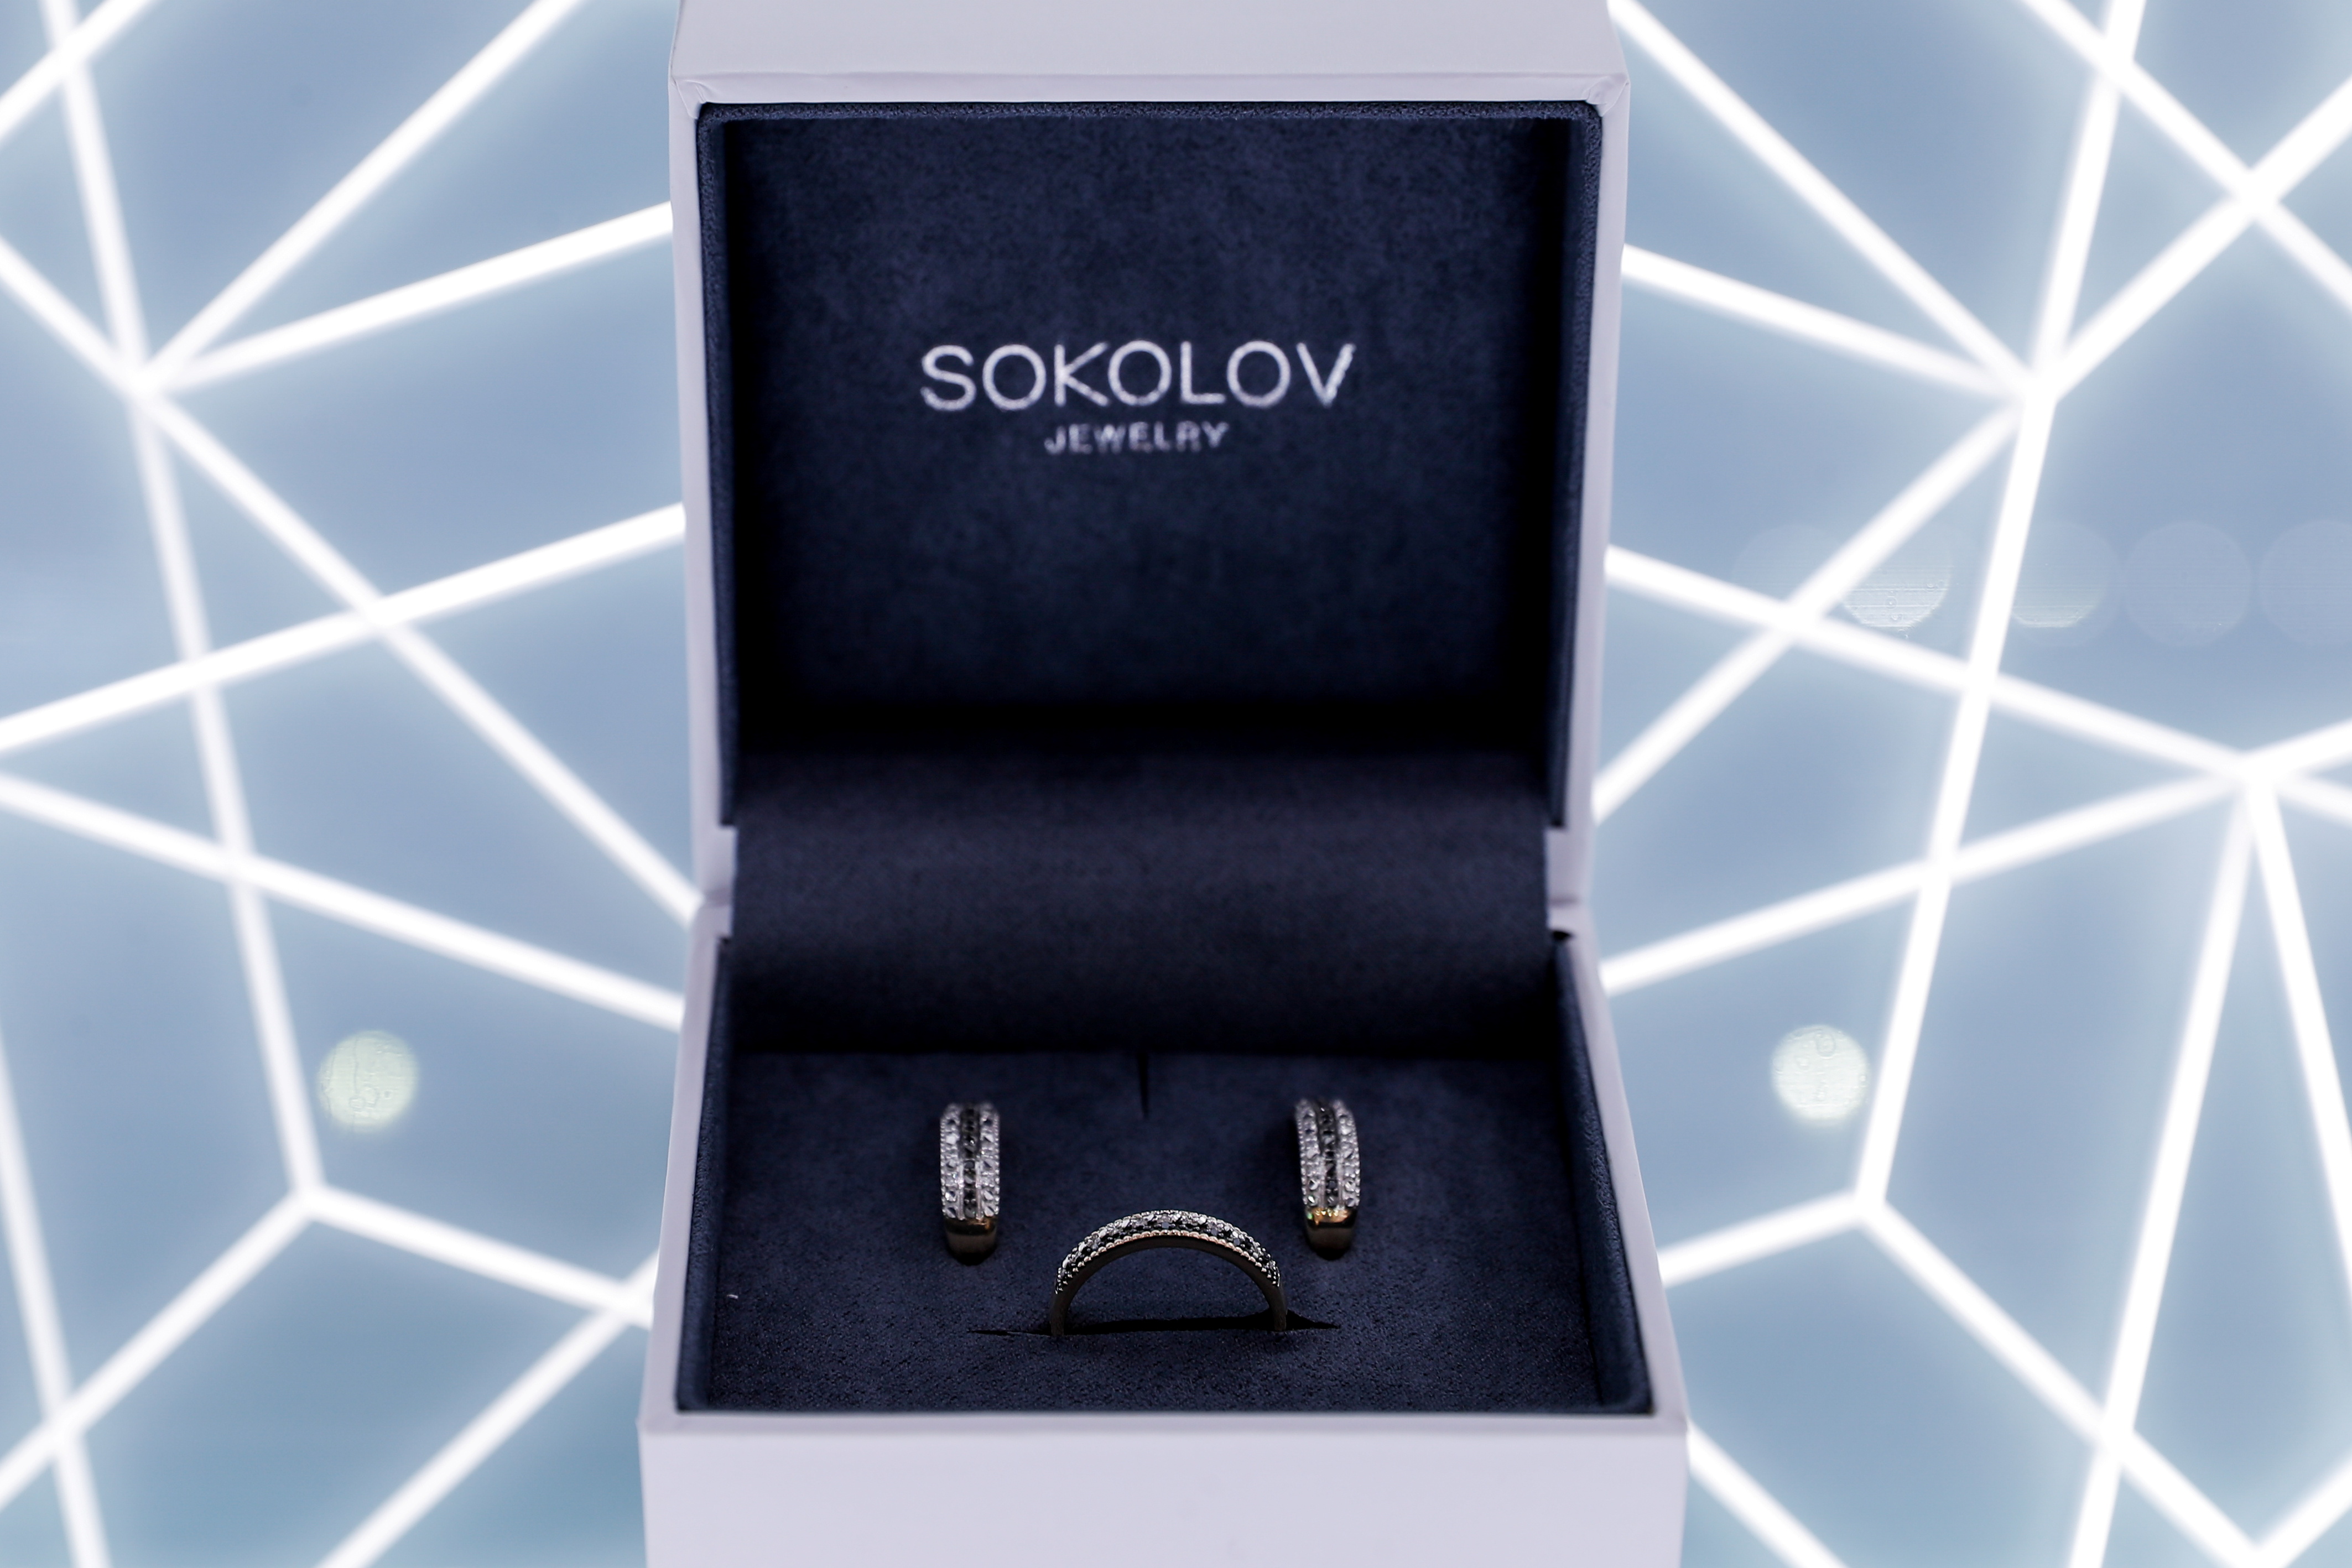 Items by Sokolov Jewelry are seen in Moscow